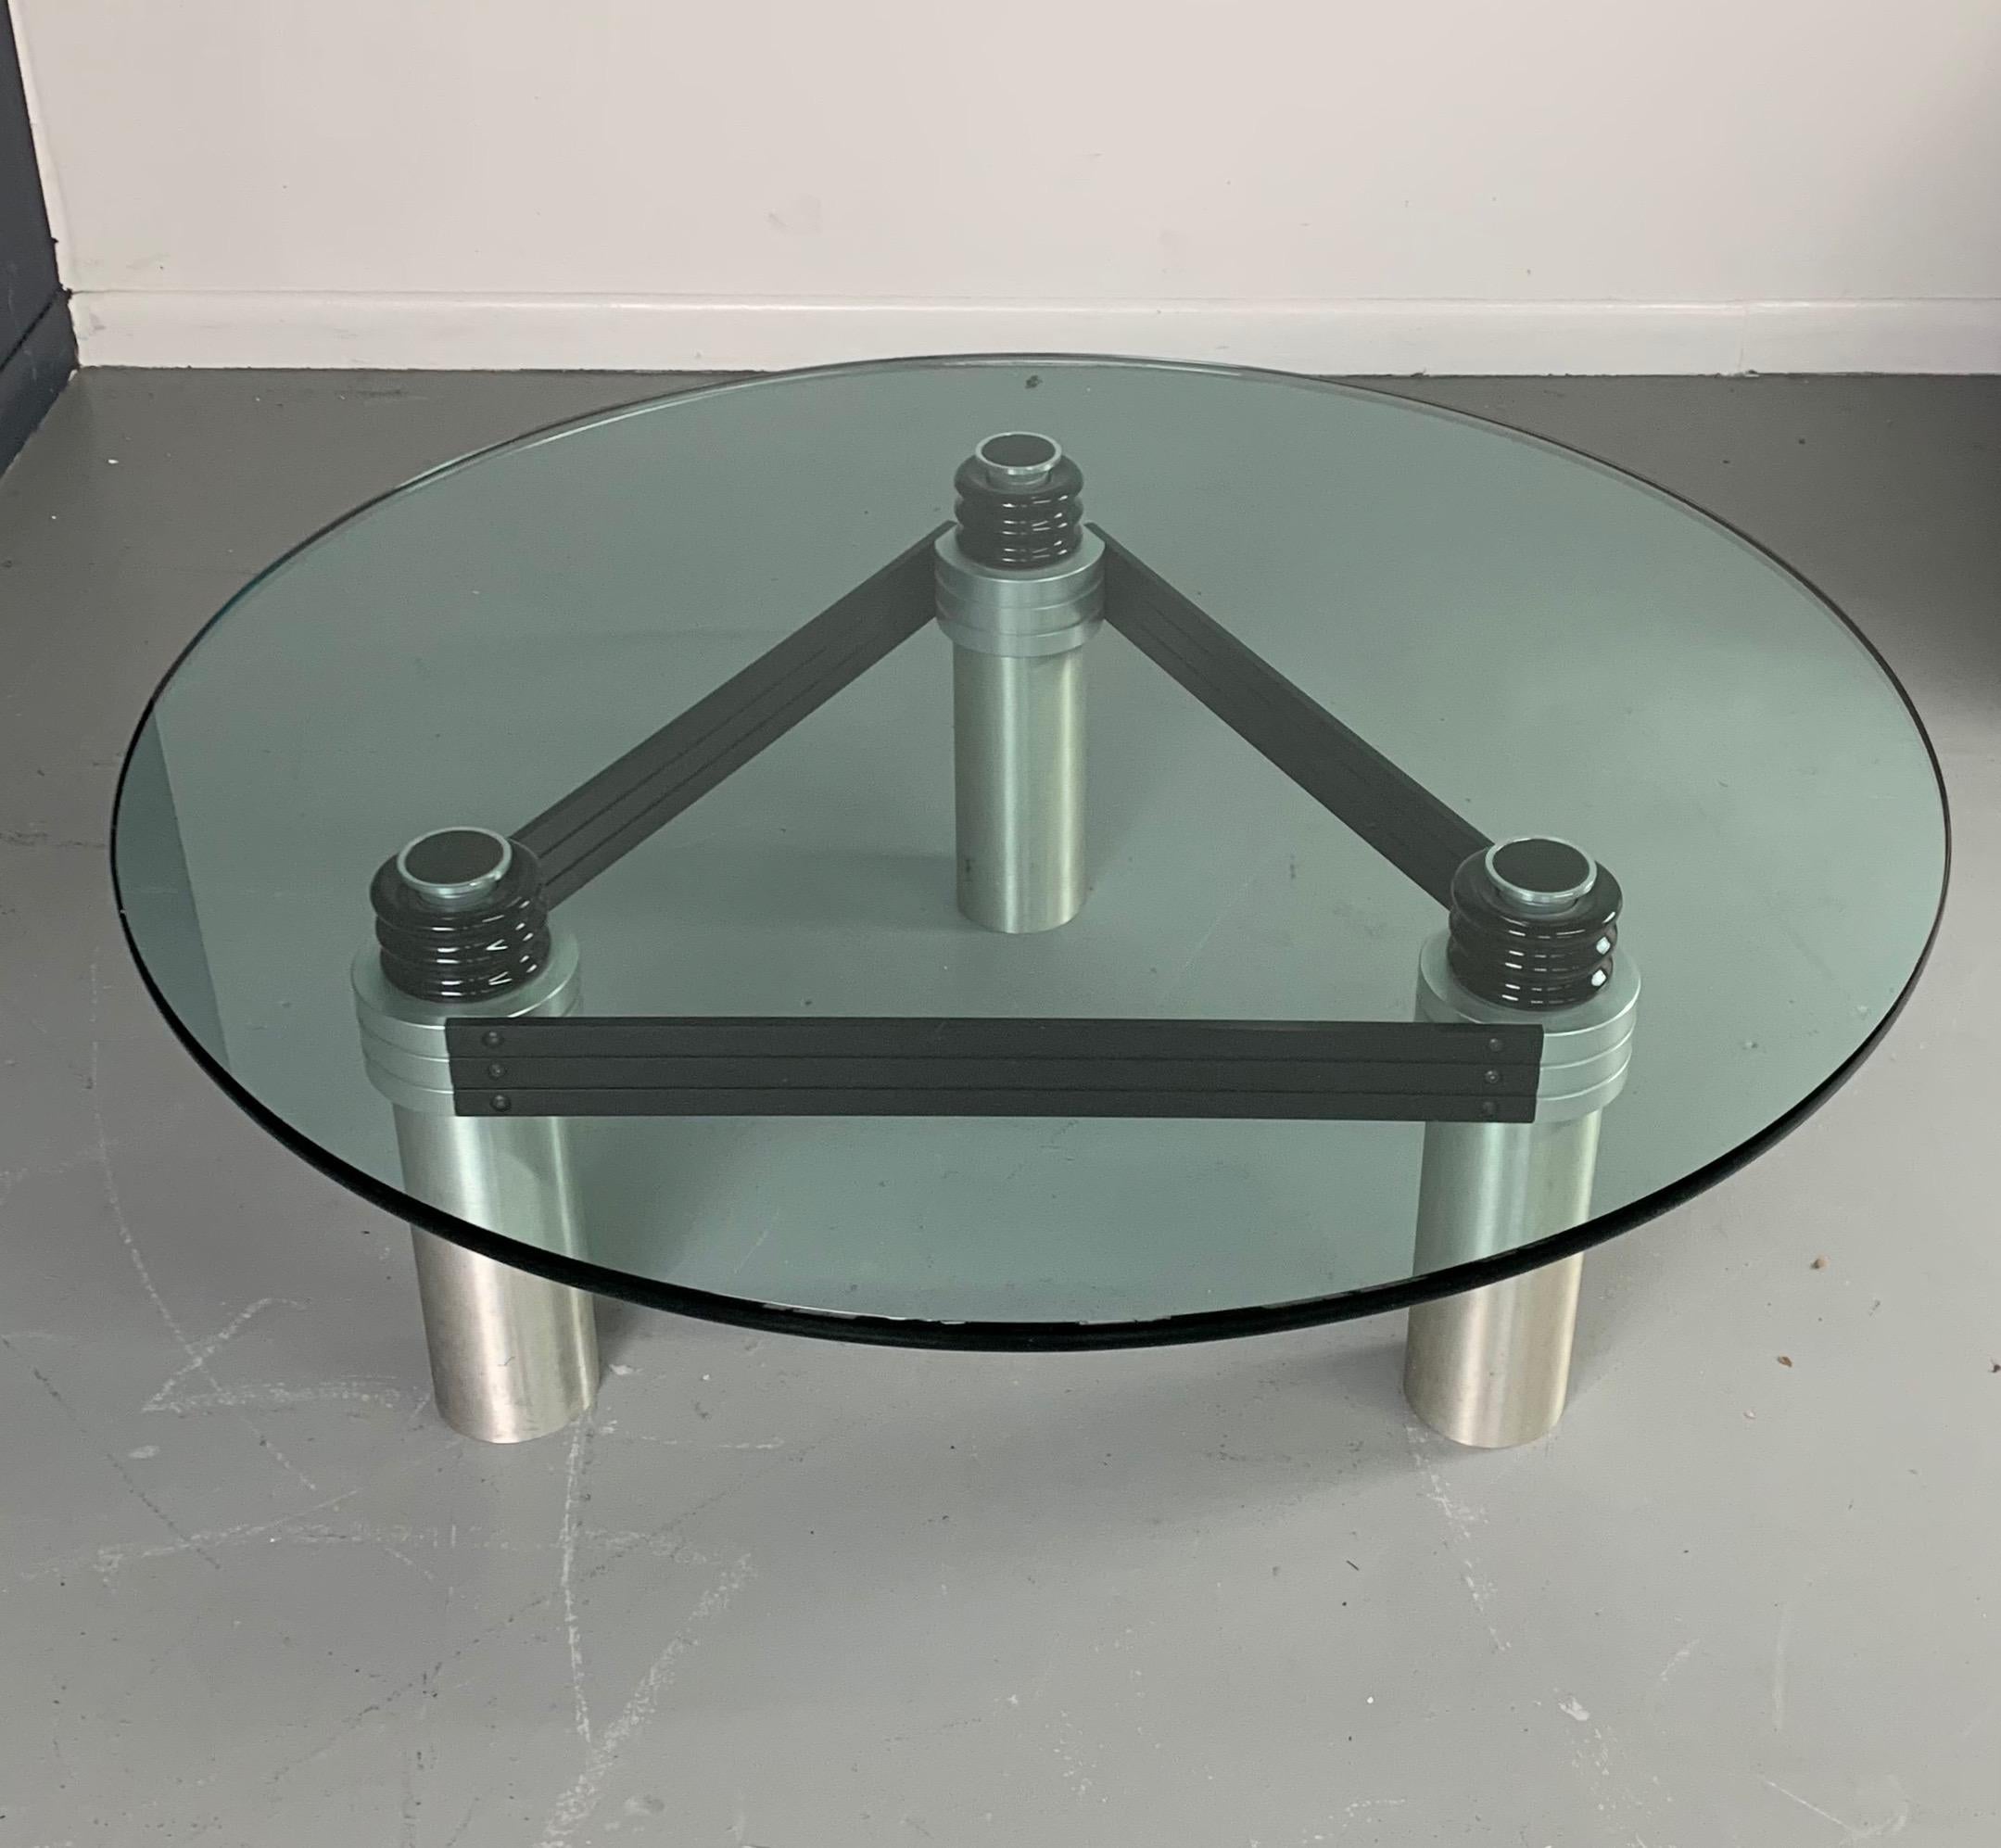 This terrific coffee table designed and built by Philadelphia furniture legend Bruce Kaiser uses an unusual combination of metals and ceramics. This is a 42